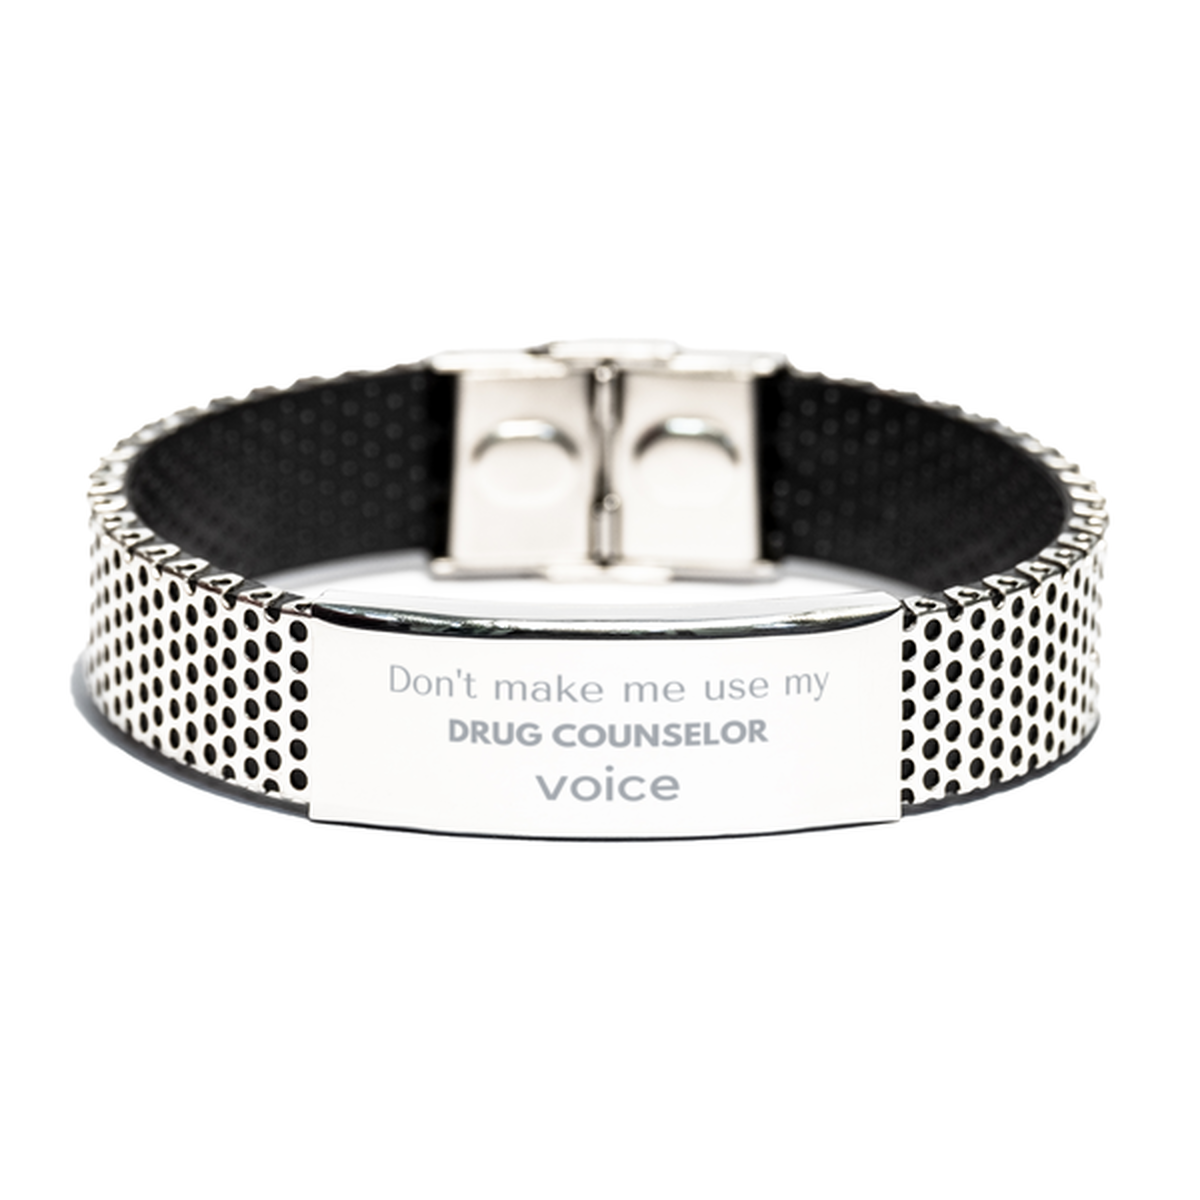 Don't make me use my Drug Counselor voice, Sarcasm Drug Counselor Gifts, Christmas Drug Counselor Stainless Steel Bracelet Birthday Unique Gifts For Drug Counselor Coworkers, Men, Women, Colleague, Friends